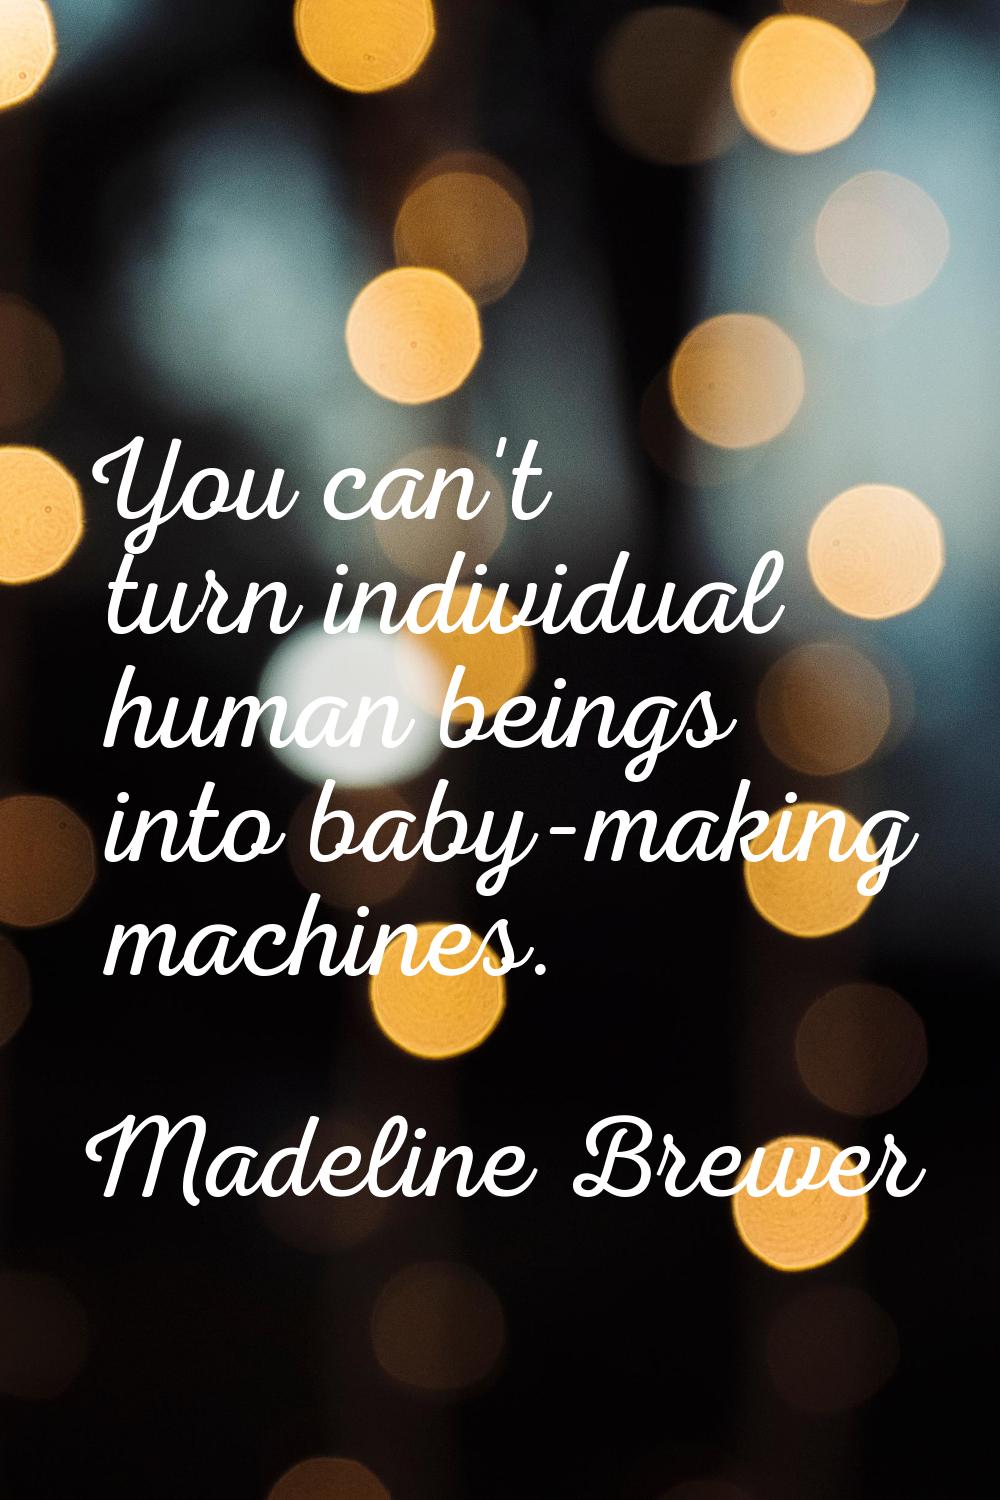 You can't turn individual human beings into baby-making machines.